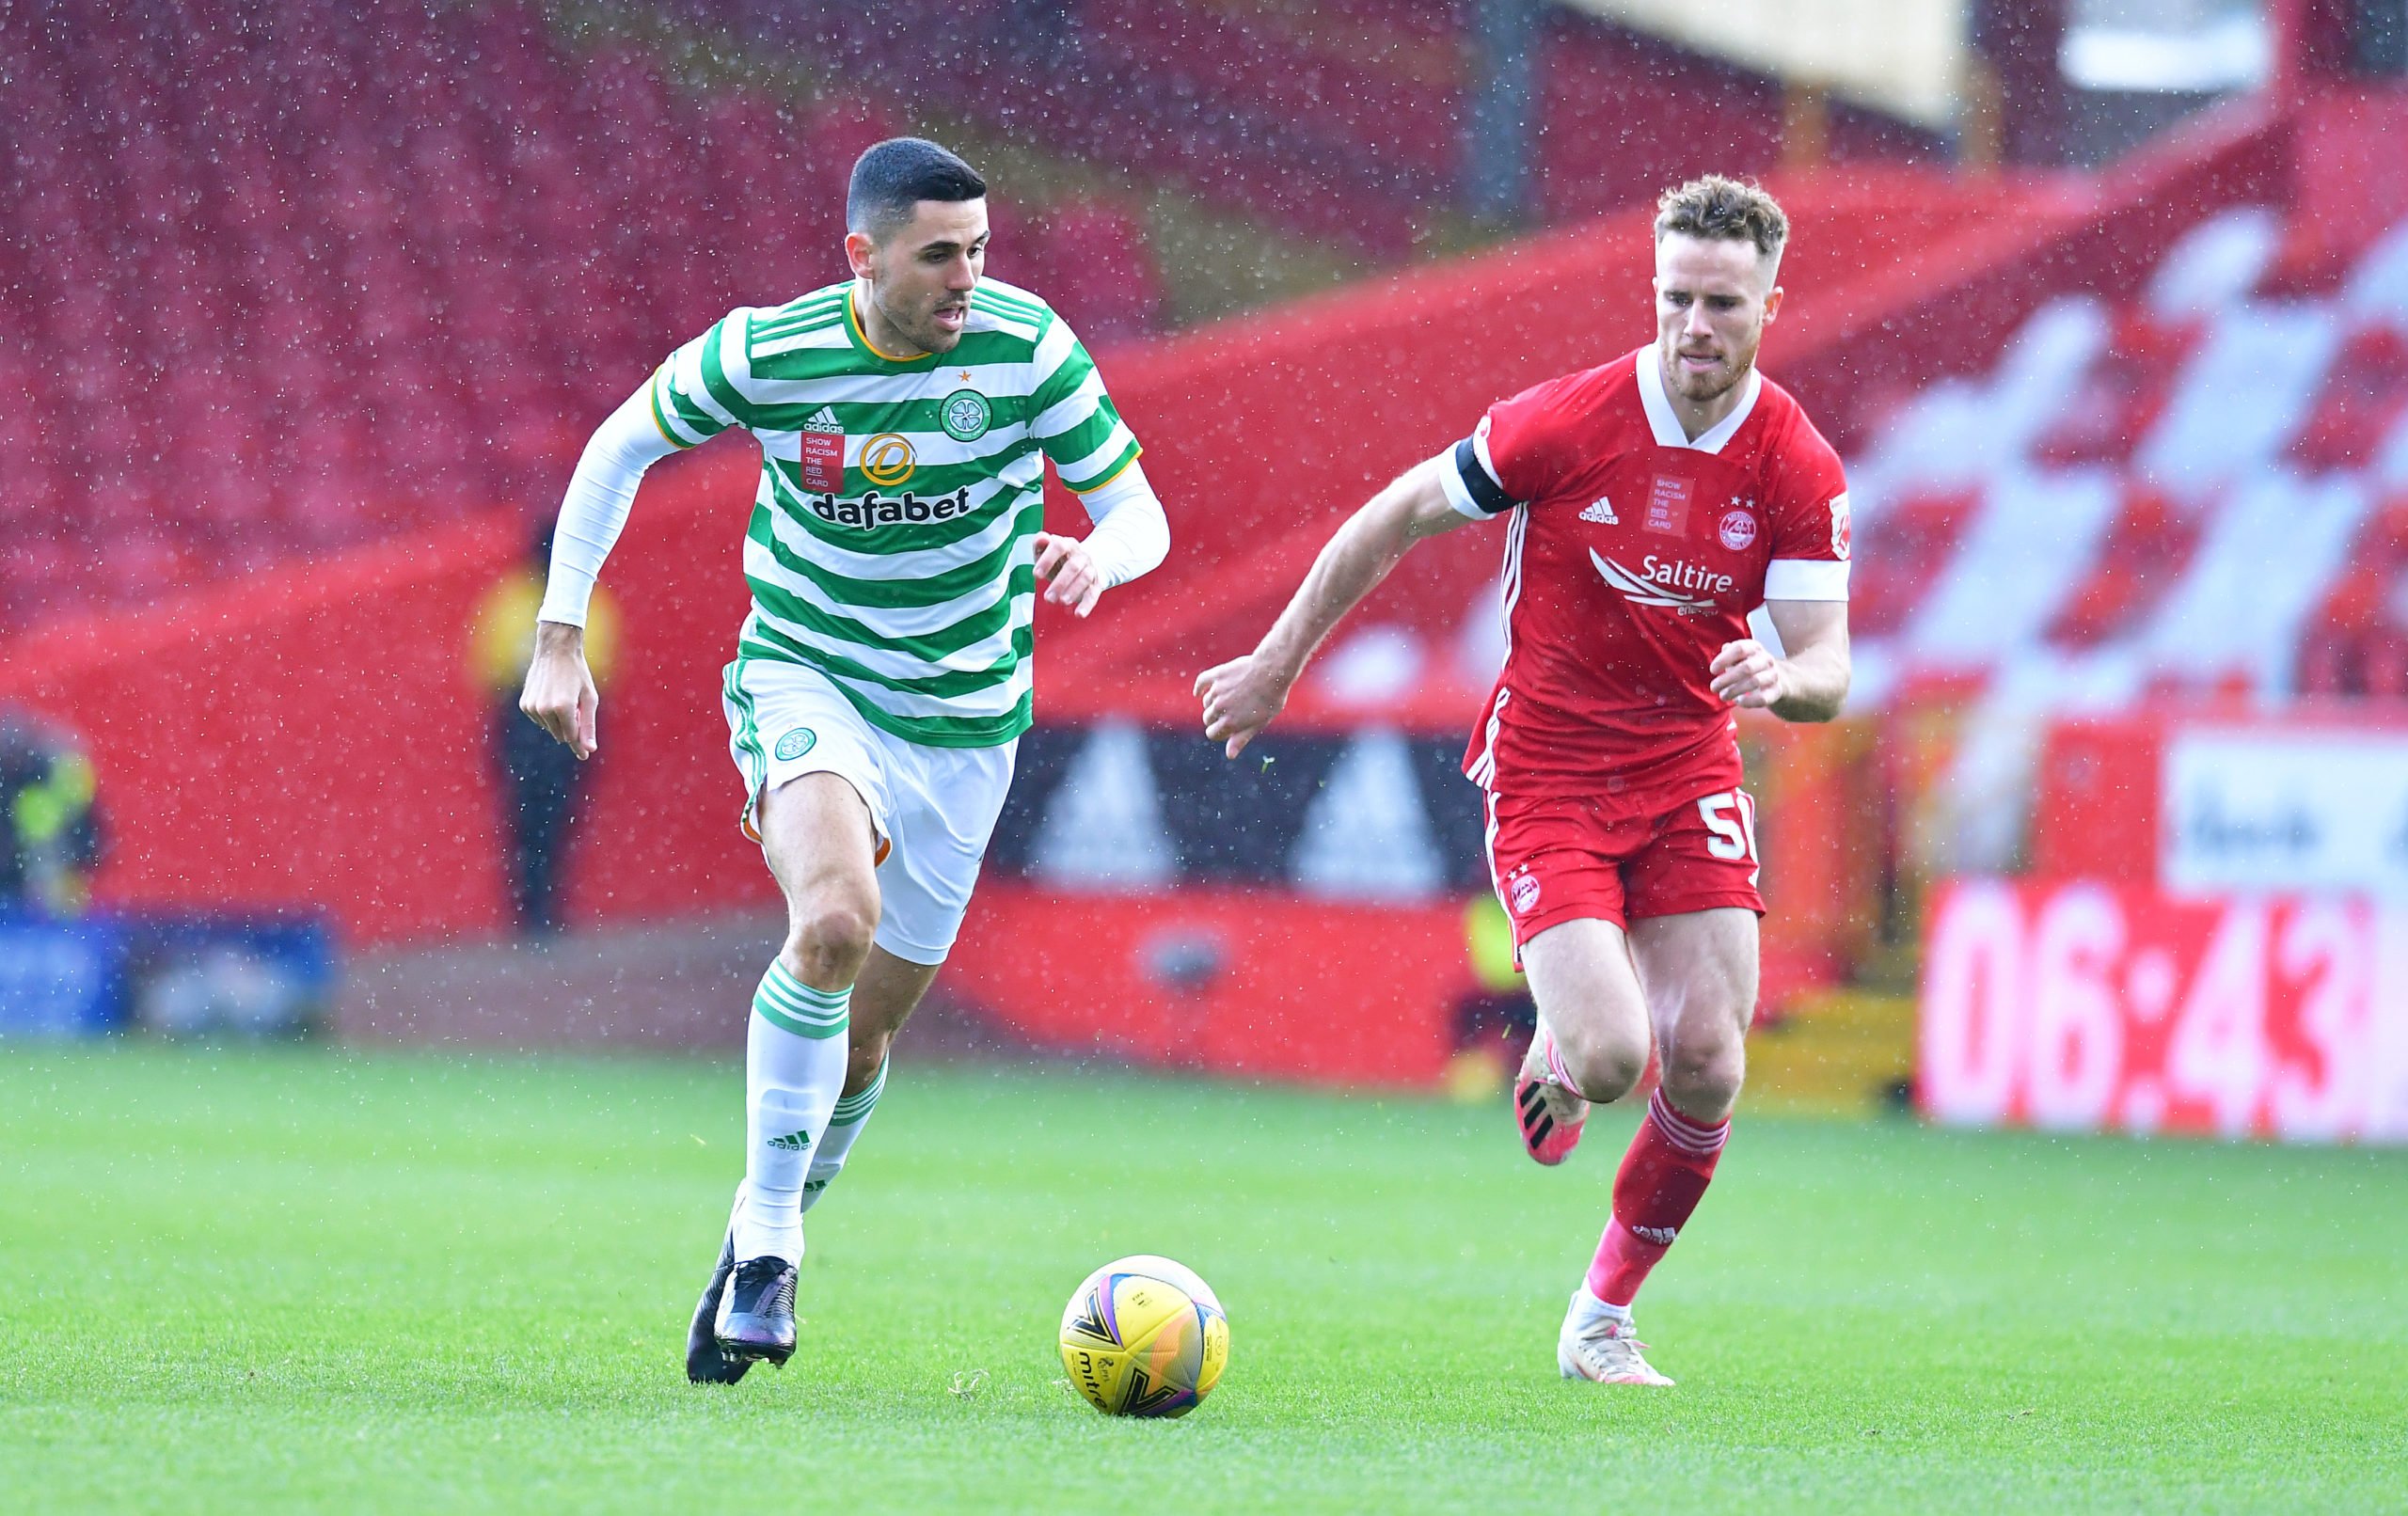 Willie Miller pushes prospect of Aberdeen topping Celtic; but we'll never be that bad